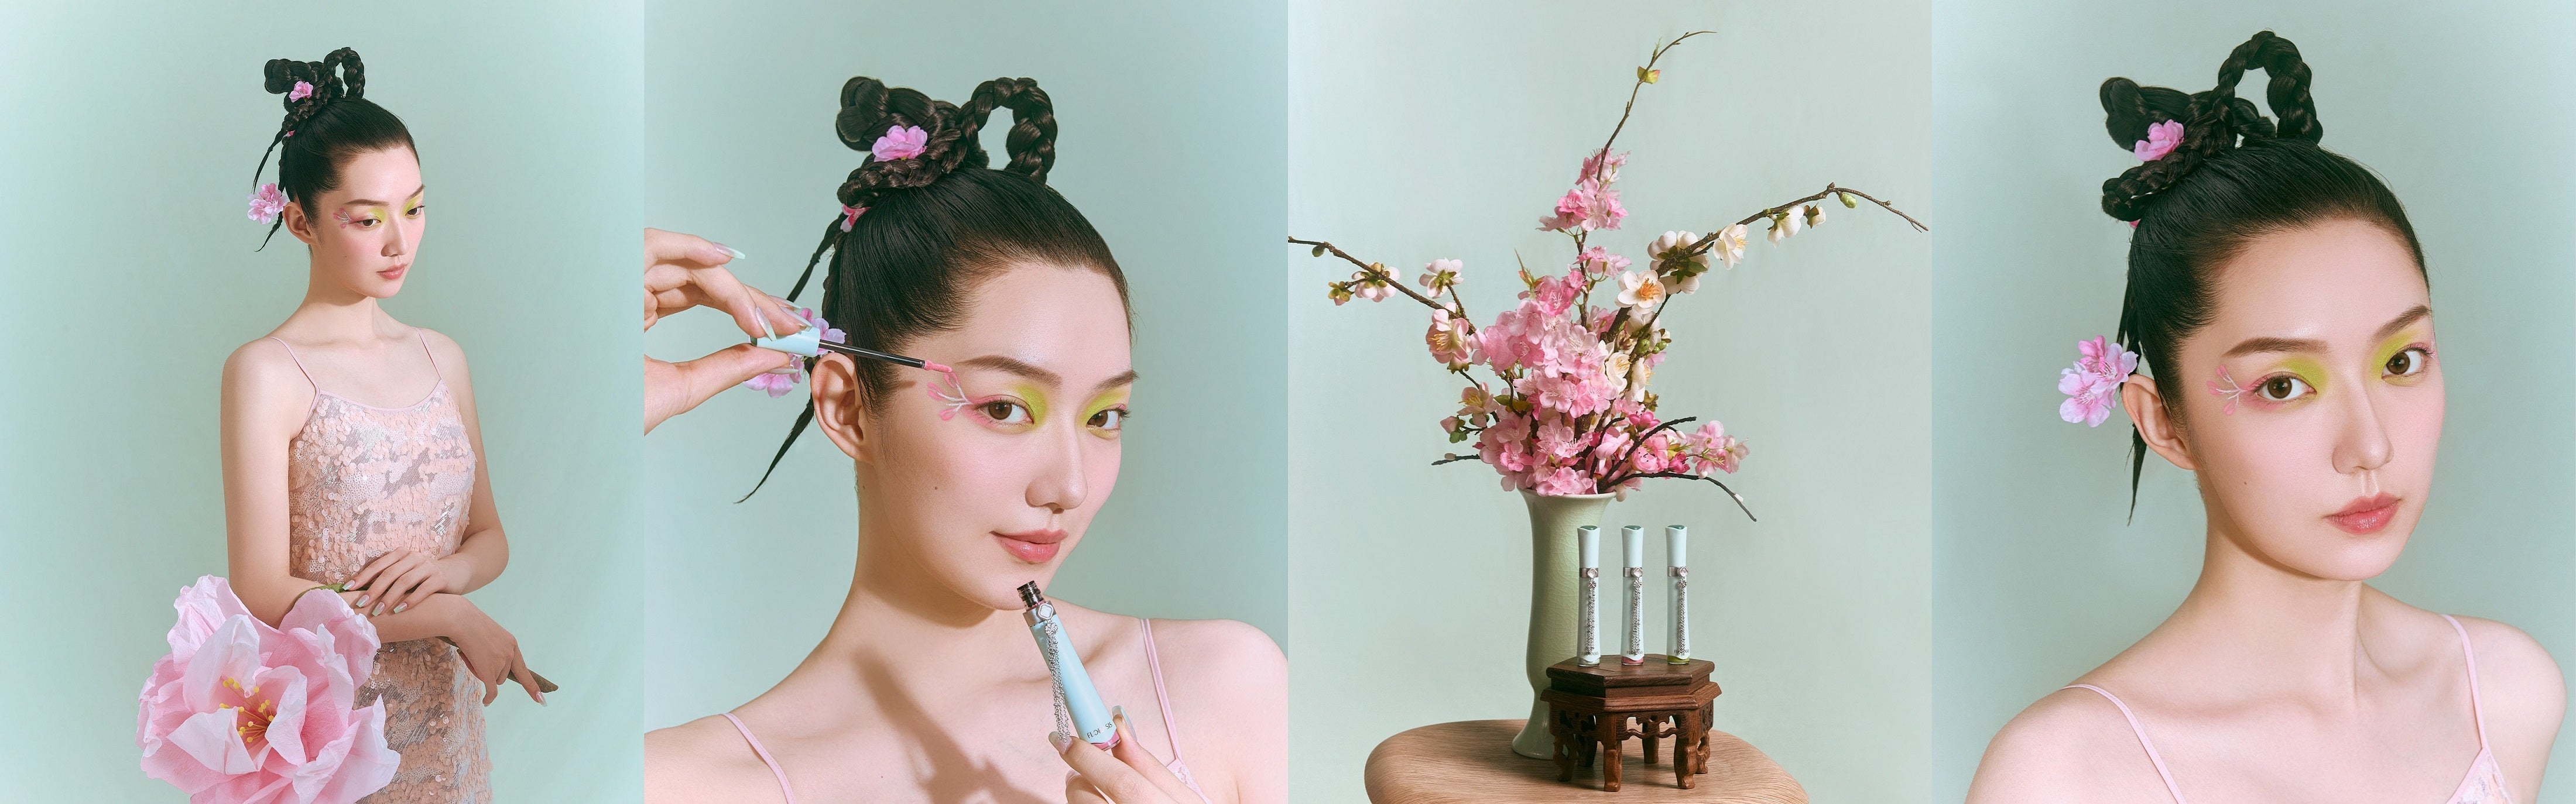 EMBRACE SPRING BLOOMS: LEGENDS OF THE SPRING FLOWER GODDESSES AND INSPIRED BEAUTY LOOK